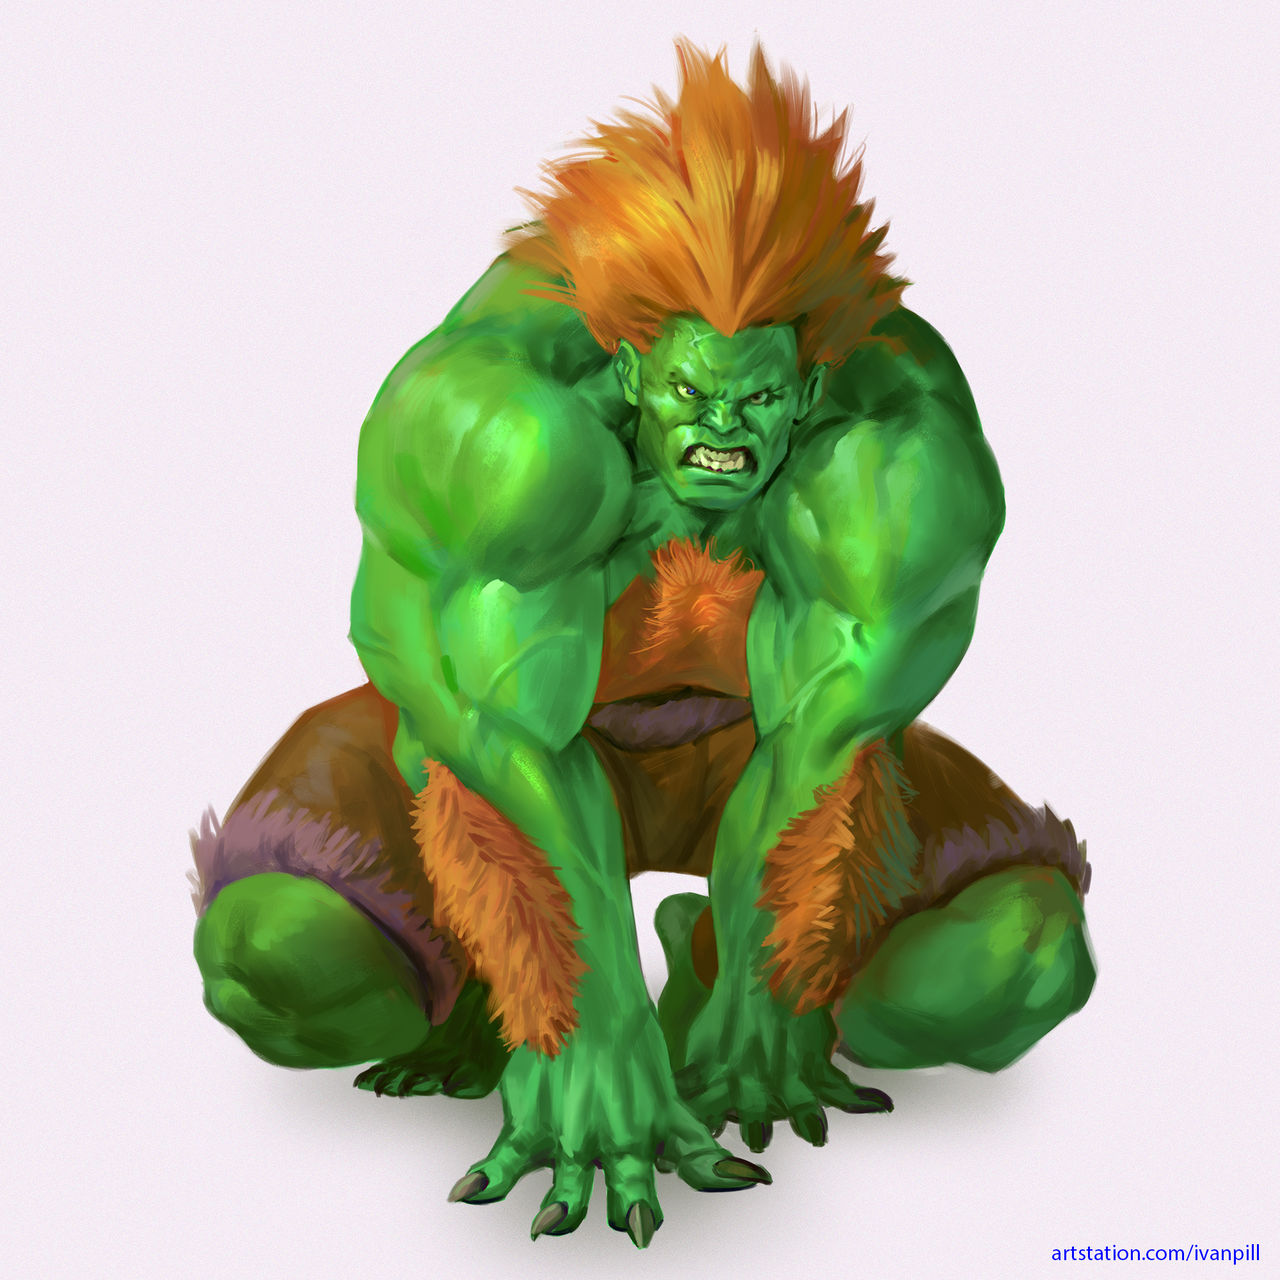 Blanka - Street Fighters - Second take - Character profile 